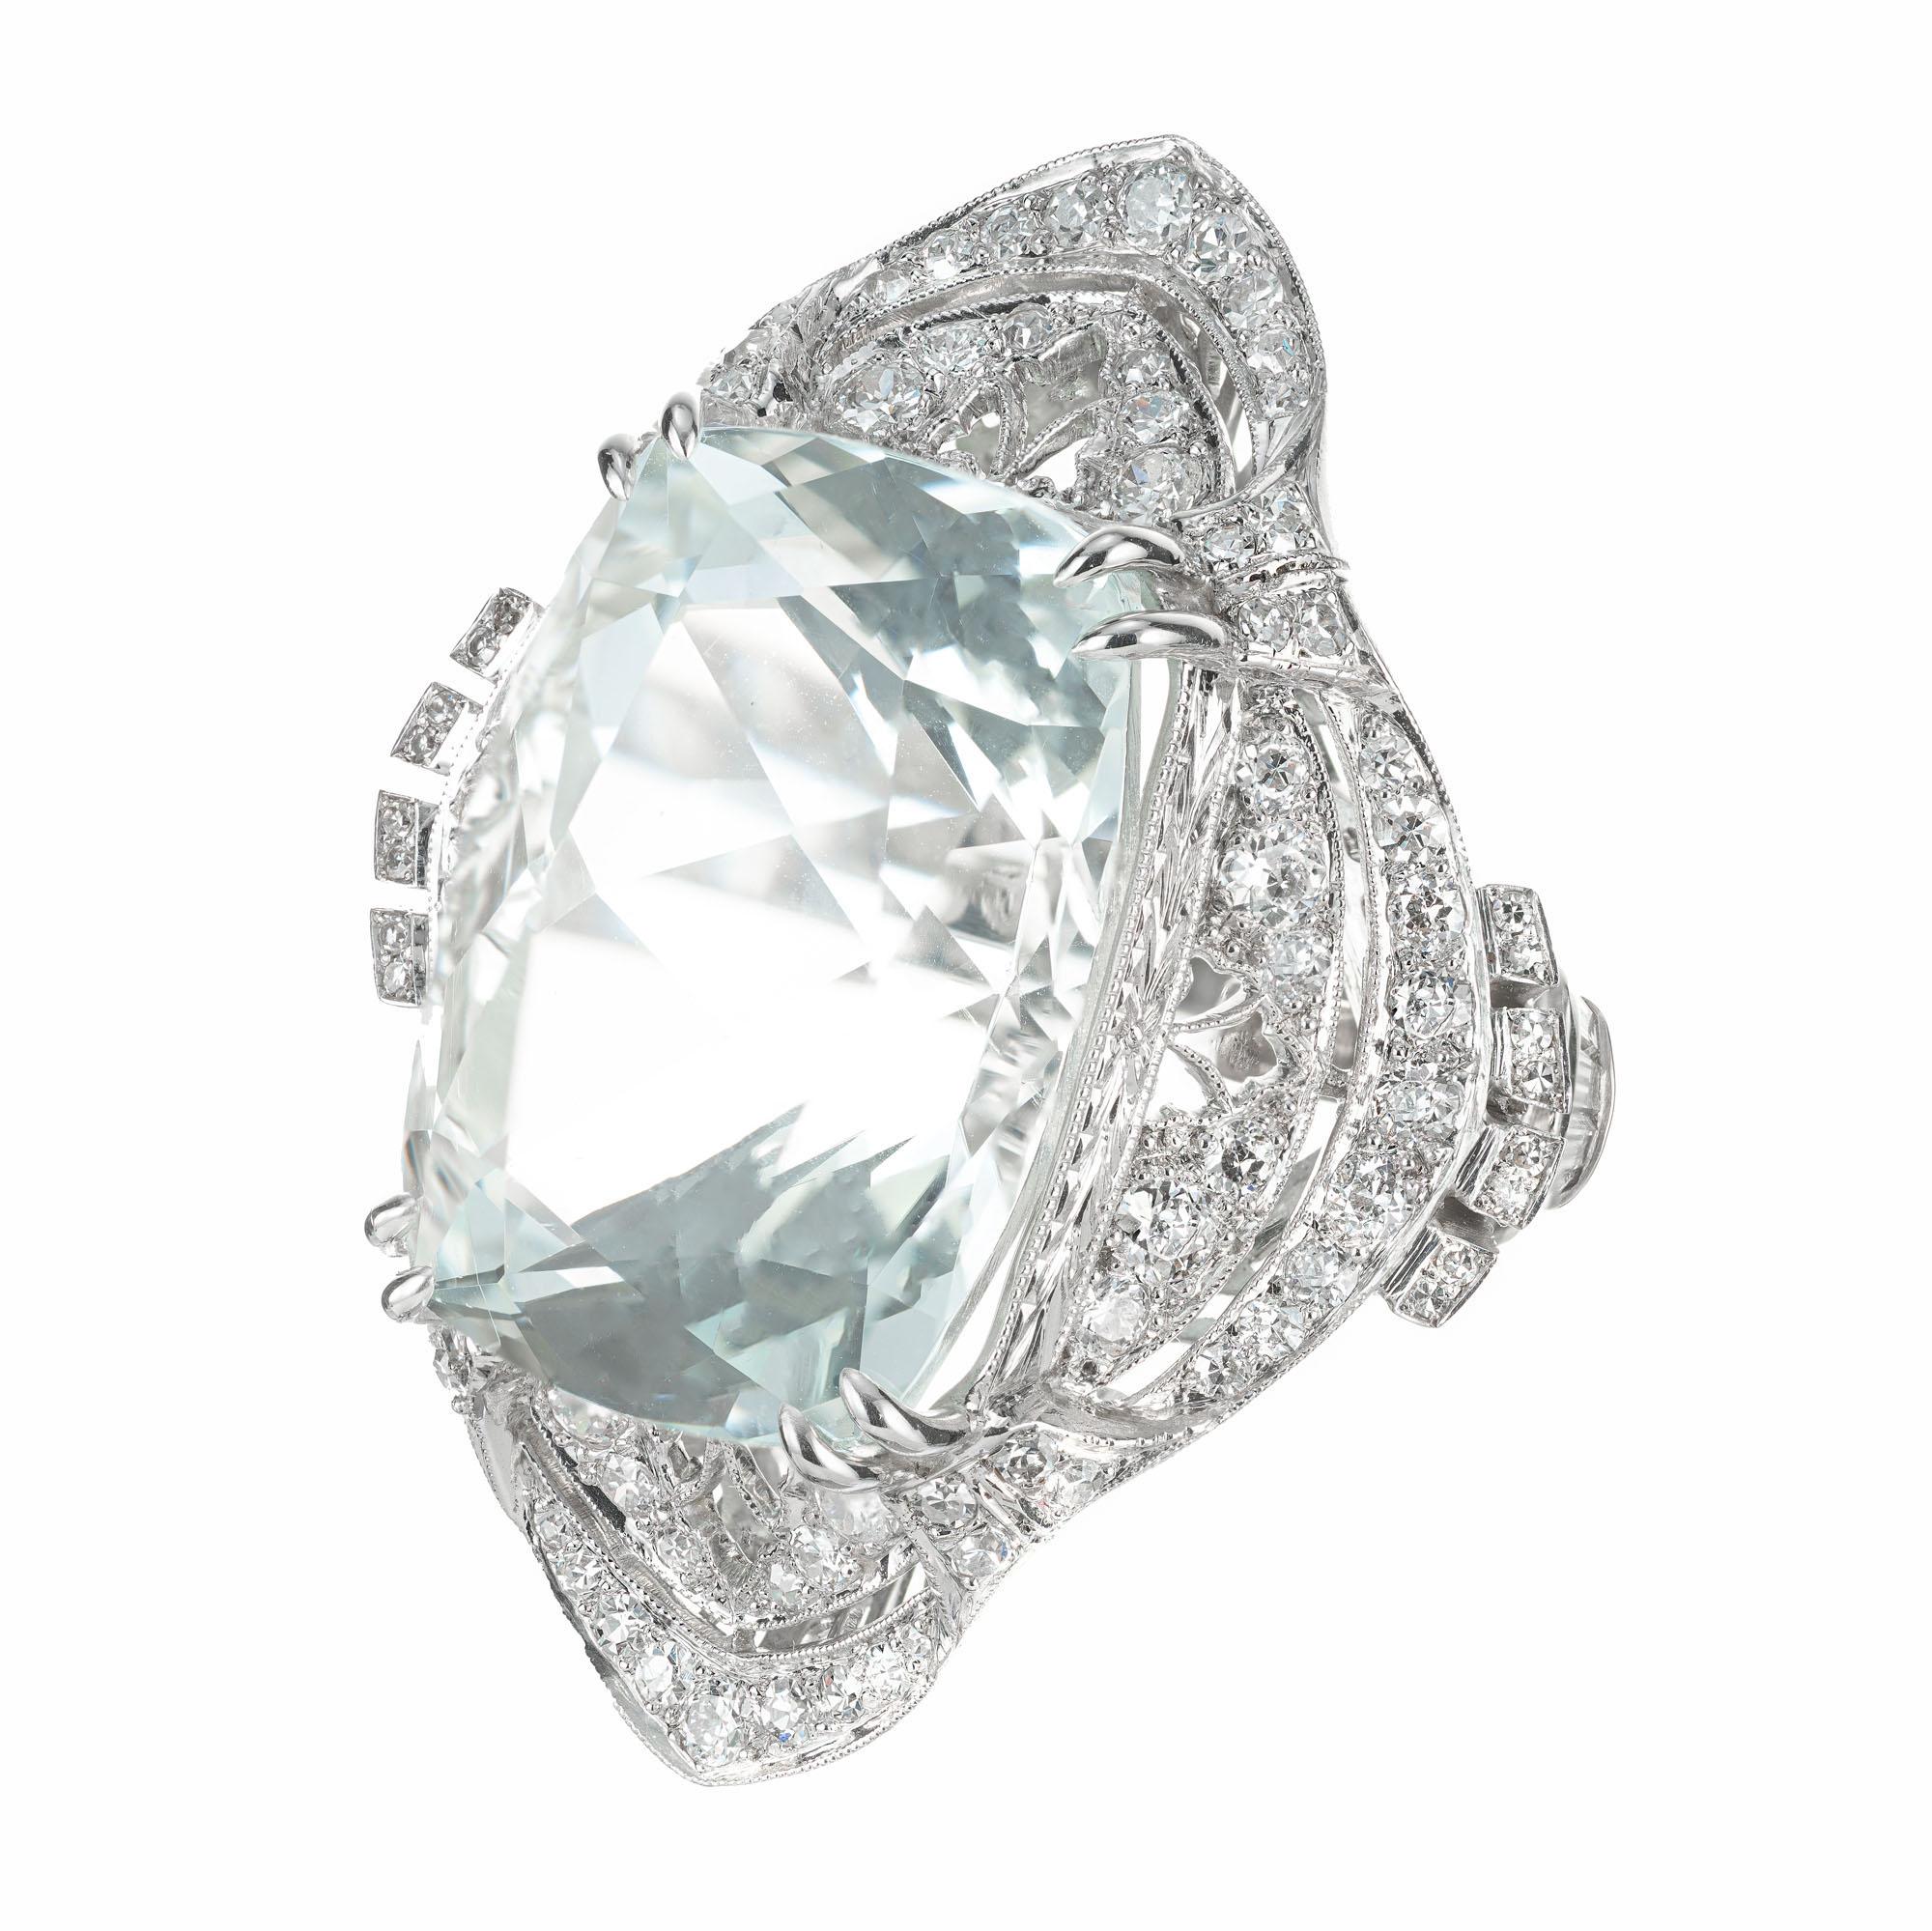 Large cushion brilliant cut pale blue natural untreated aqua and diamond cocktail ring. 29.34ct Aquamarine in its original handmade, 1940's filigree, hand engraved platinum setting with 108 round brilliant cut diamonds and 12 step cut baguette